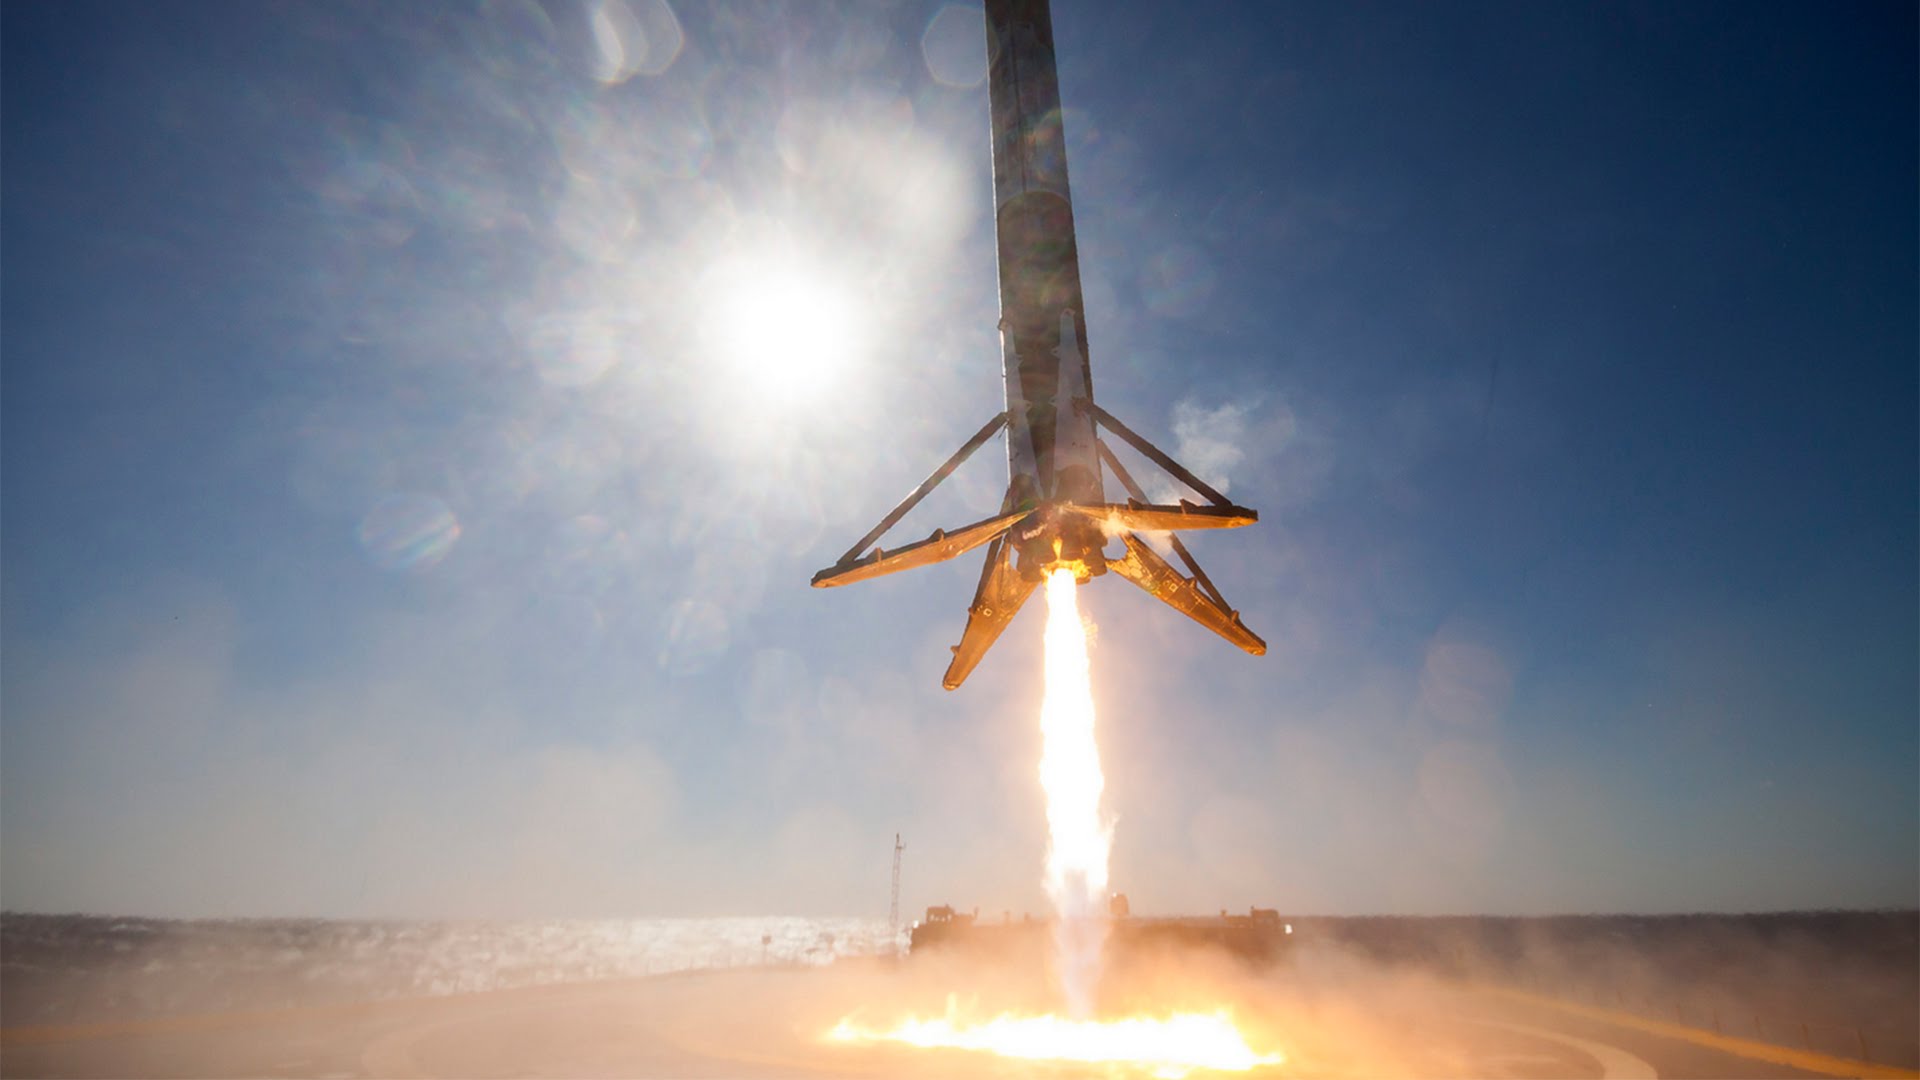 A Wonderful 360 Degree Video of the SpaceX Falcon 9 Rocket Landing on a  Drone Ship